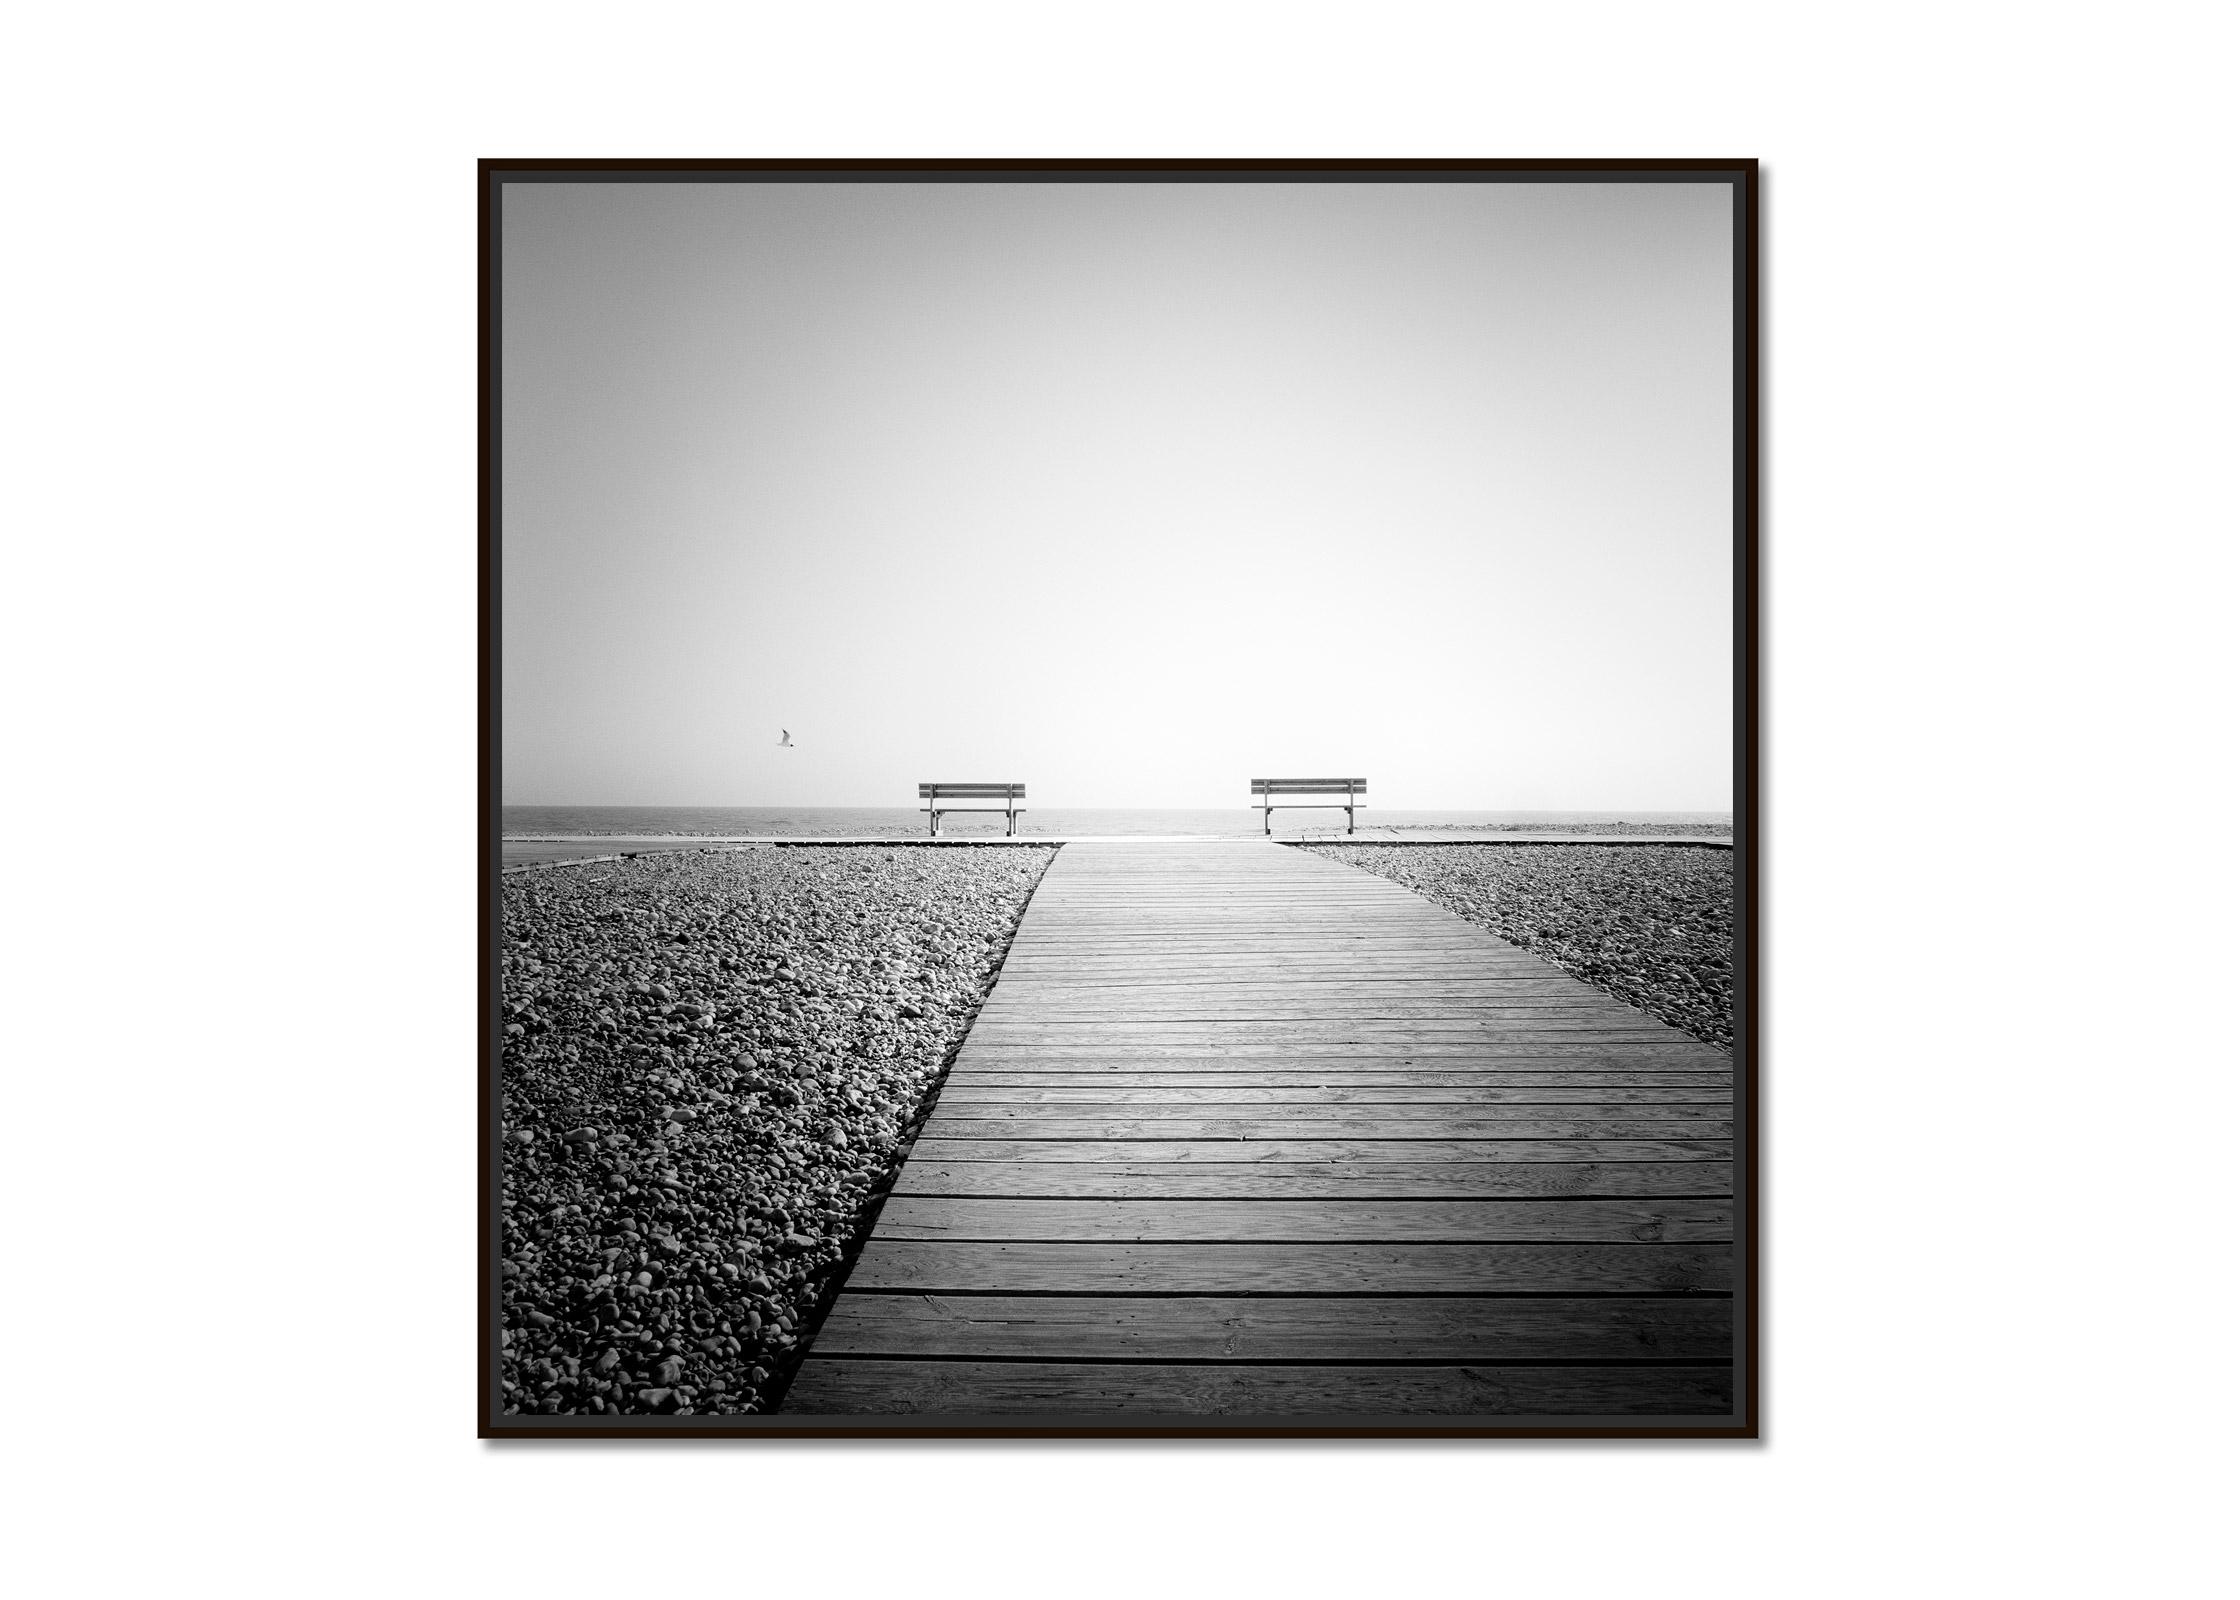 Esplanade, lonely rocky beach, France, Black and White landscape art photography - Photograph by Gerald Berghammer